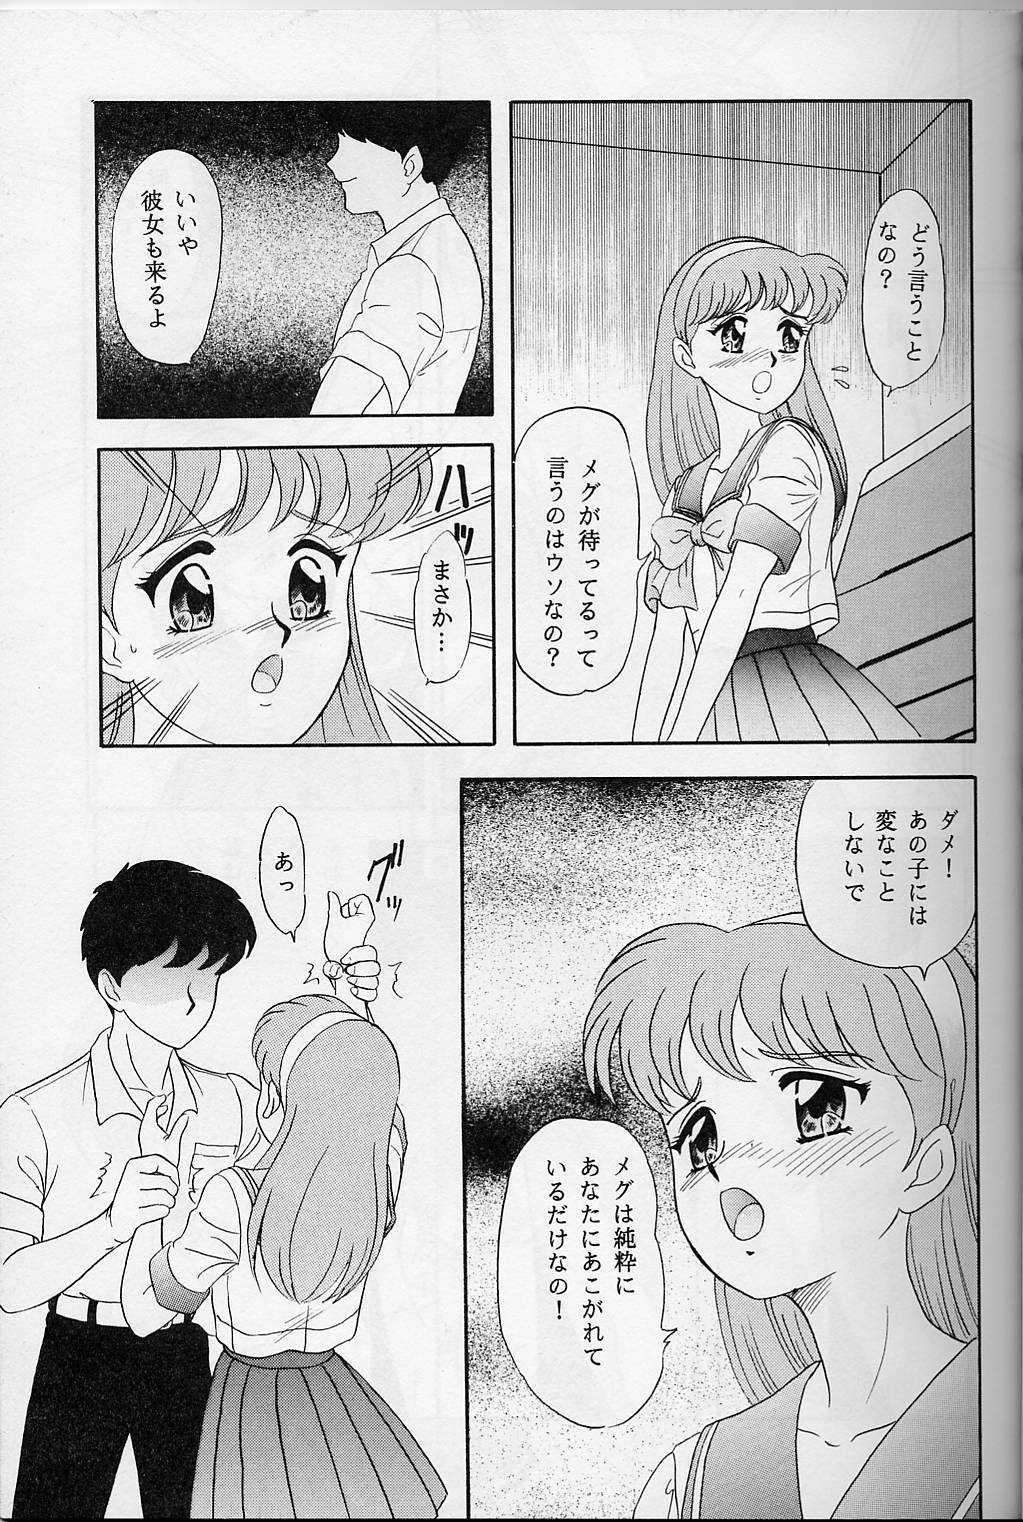 Hunk Lunch Time 5 - Tokimeki memorial Party - Page 6